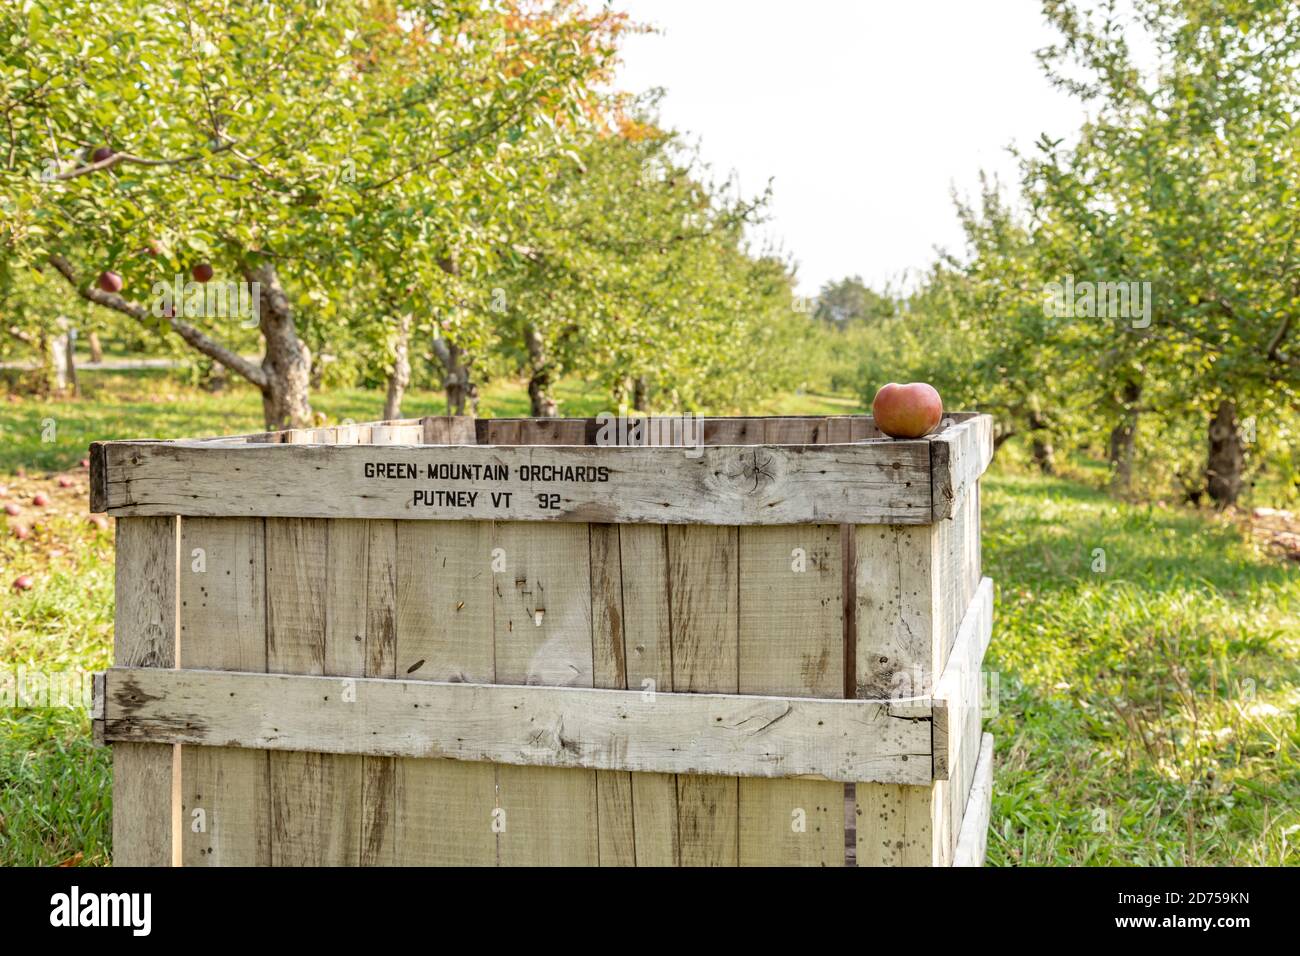 Wooden apple crate at Green Mountain Orchards in Putney Vermont Stock Photo